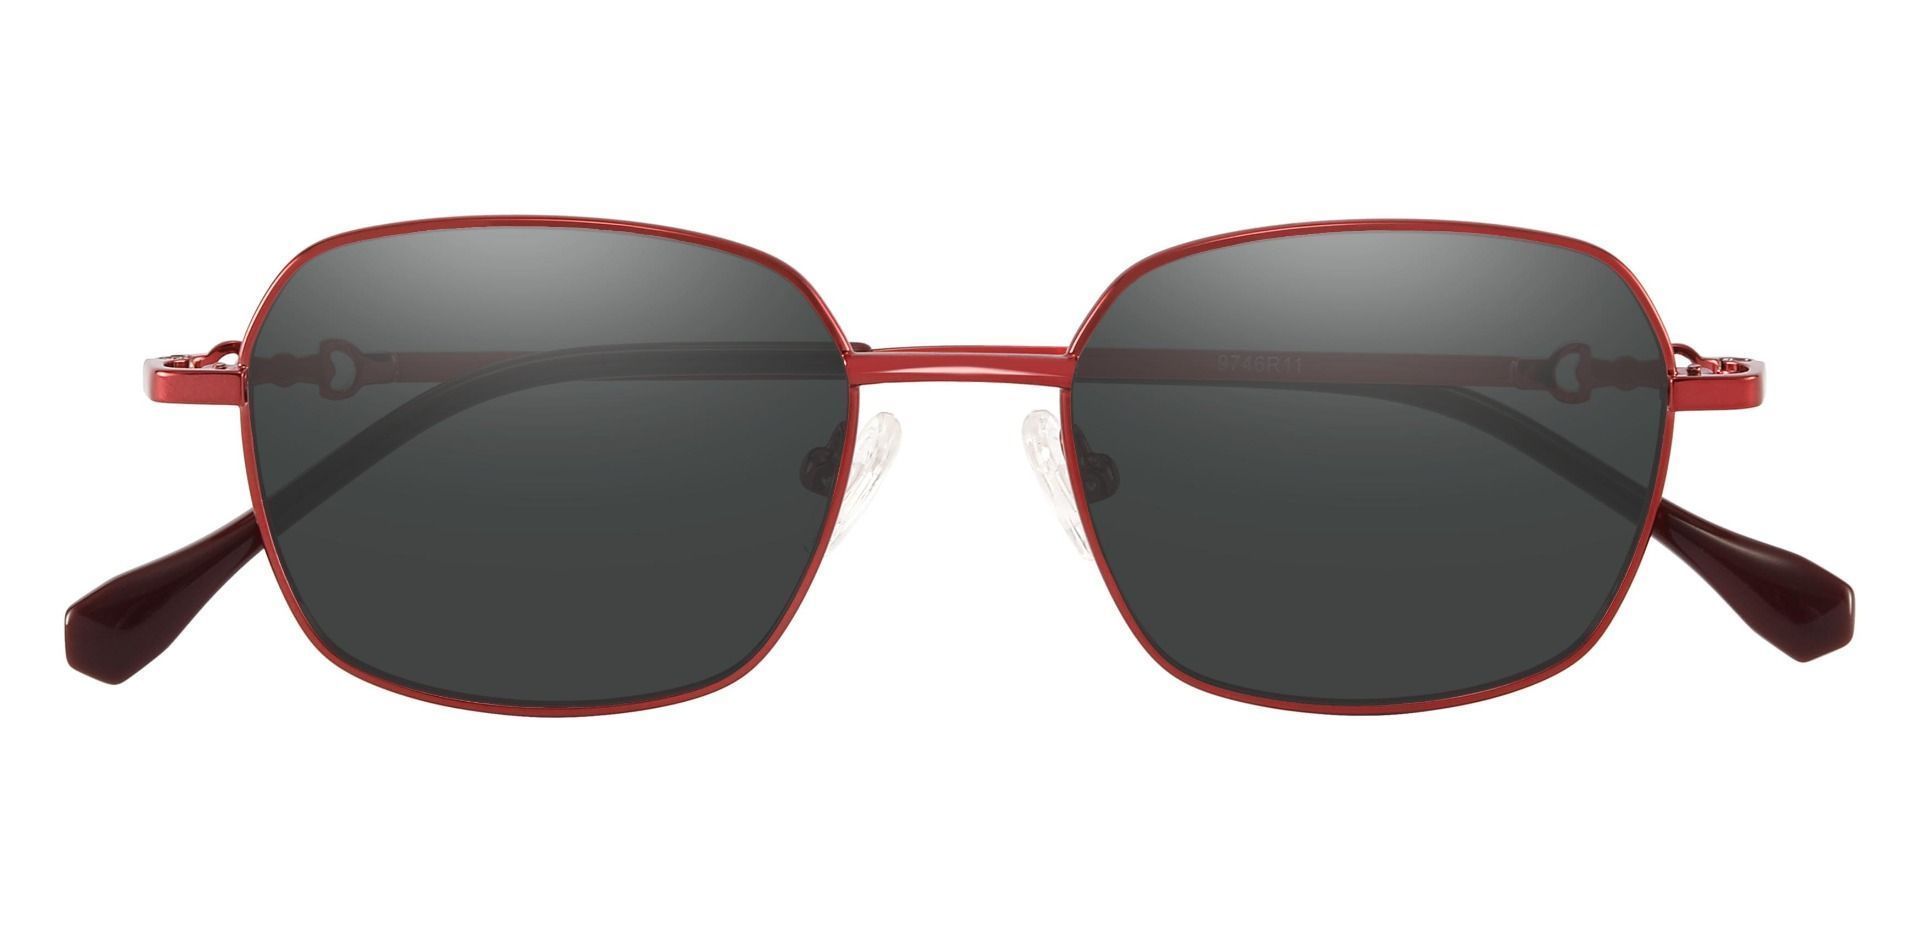 Averill Geometric Non-Rx Sunglasses - Red Frame With Gray Lenses